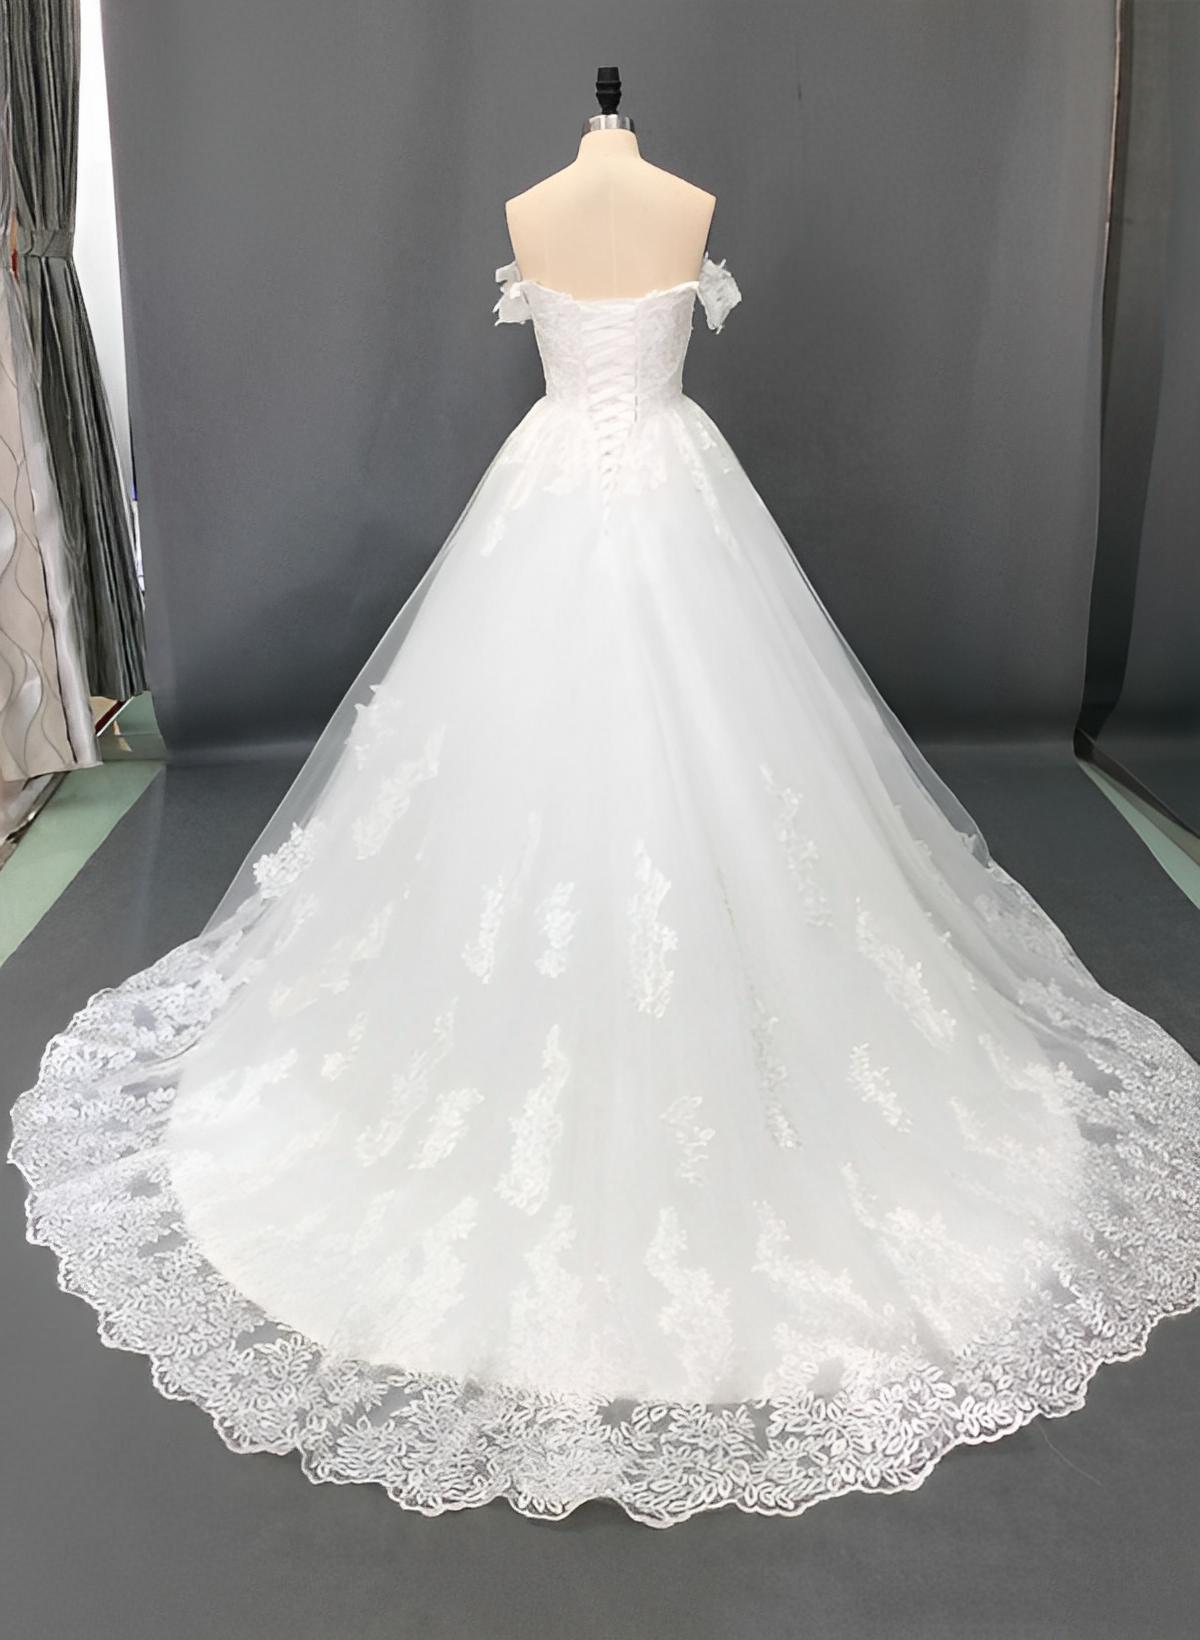 Vintage Ball-Gown Wedding Dresses With Off-The-Shoulder Short Sleeves Tulle Lace Court Train